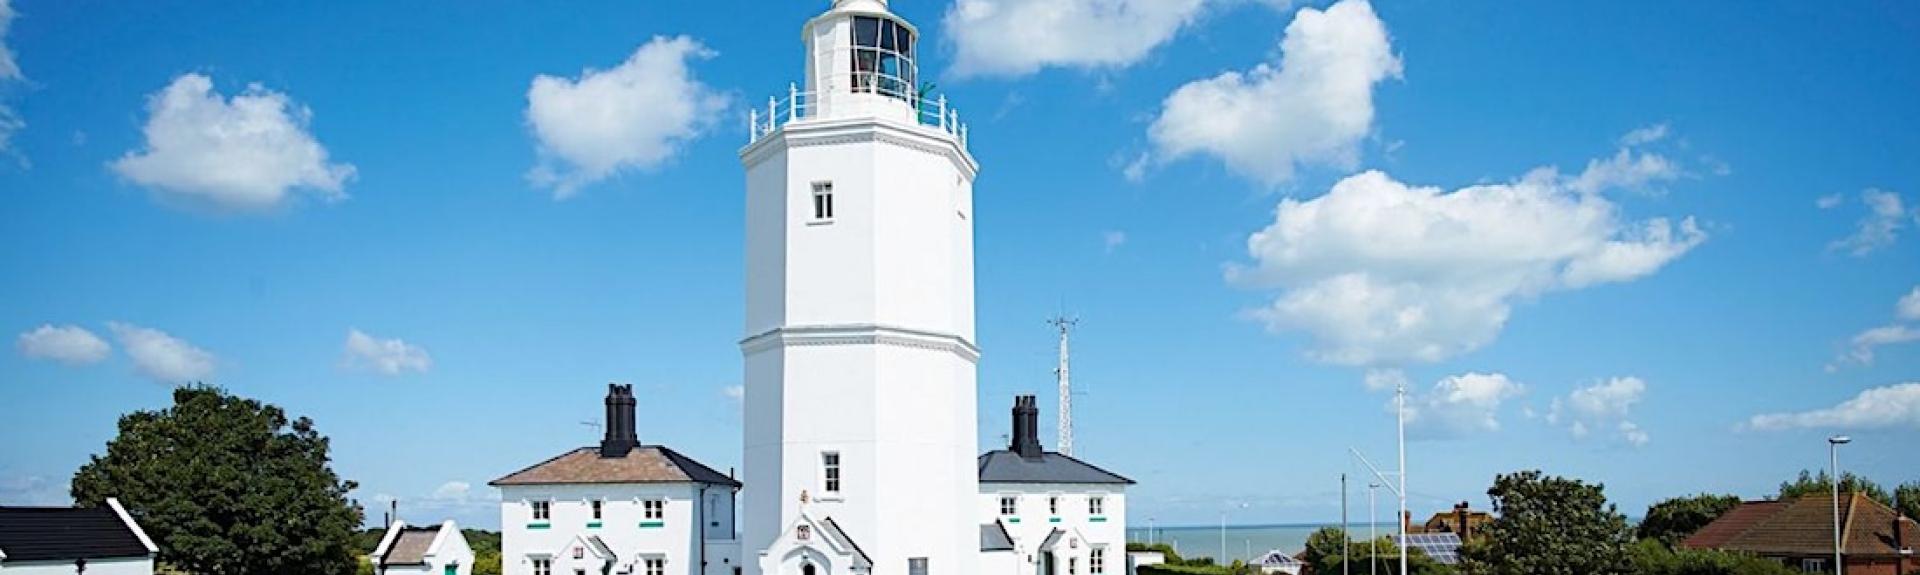 A clifftop lighthouse complex in Kent with well-kept lawns.